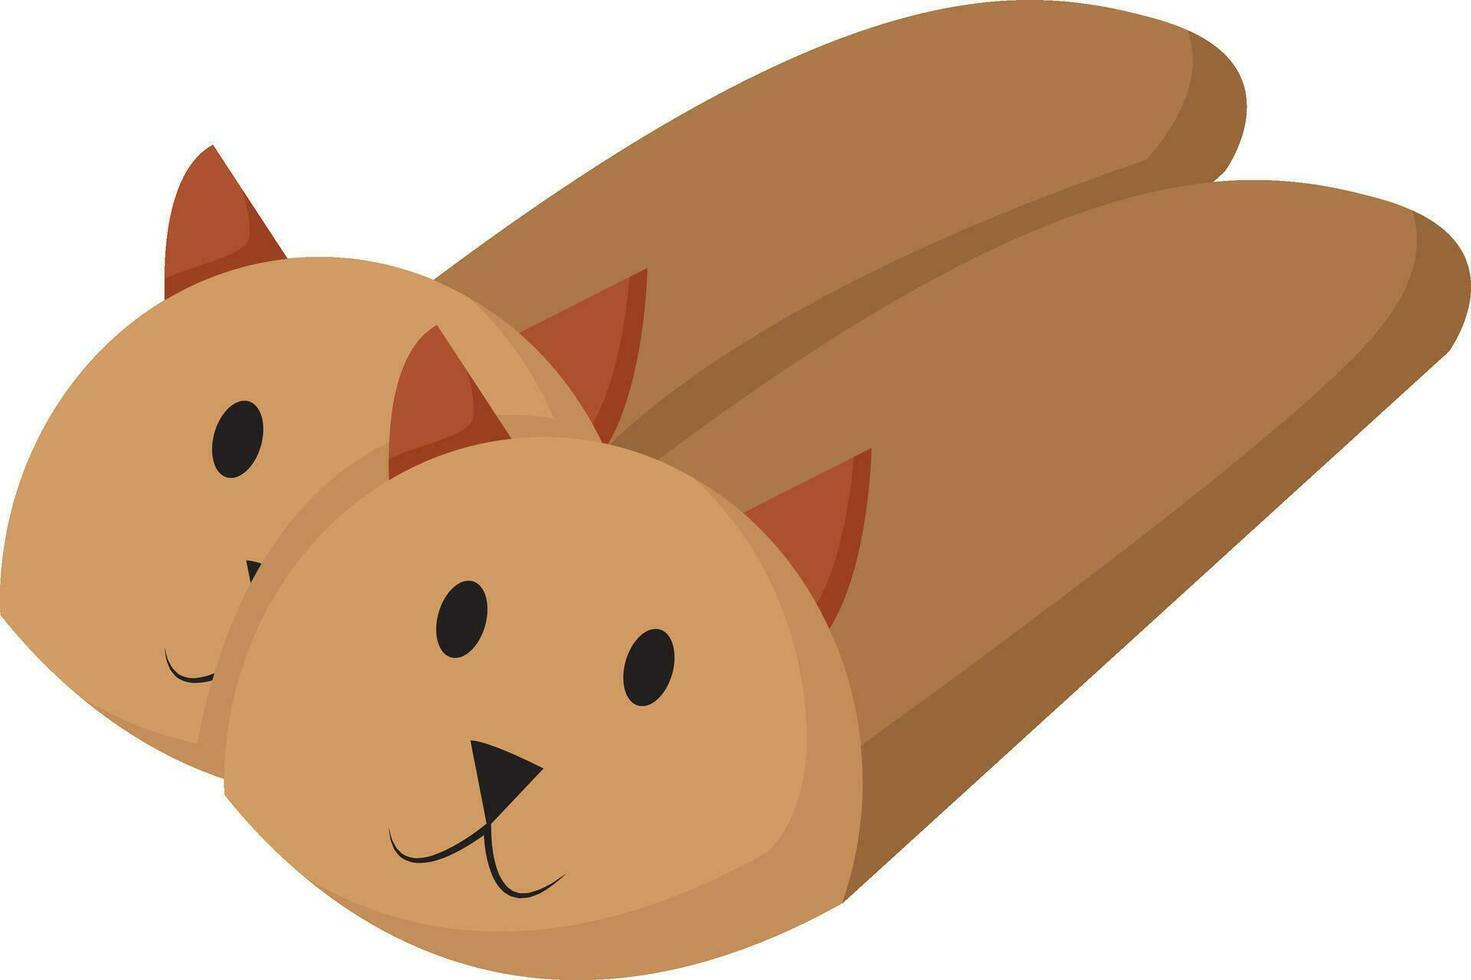 Clipart of a pair of closed toe slippers with the face of a pussy cat, vector or color illustration